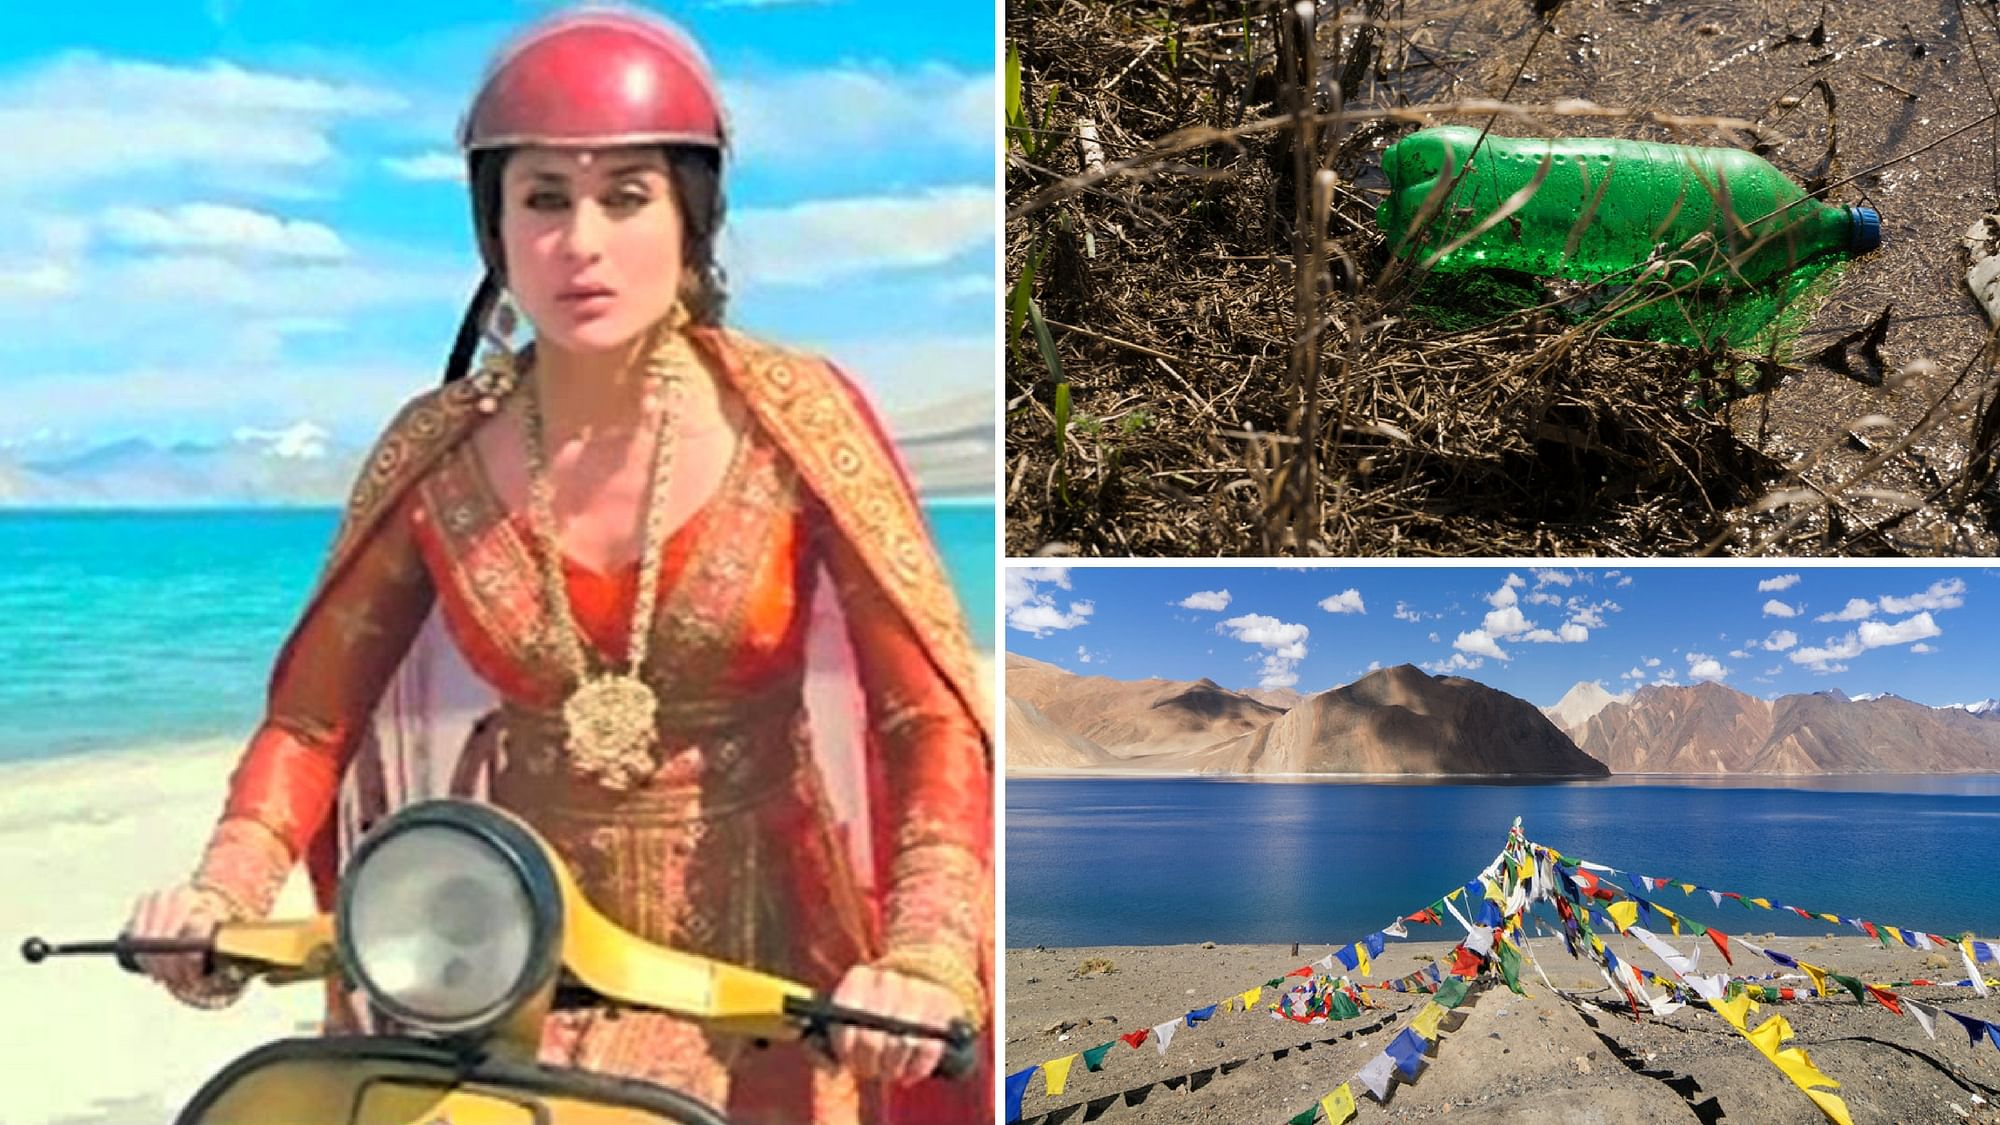 The incorrigible Indian tourist has been polluting pristine Ladakh without a care in the world. (Photo Courtesy: YouTube screenshot [L], iStock [R])